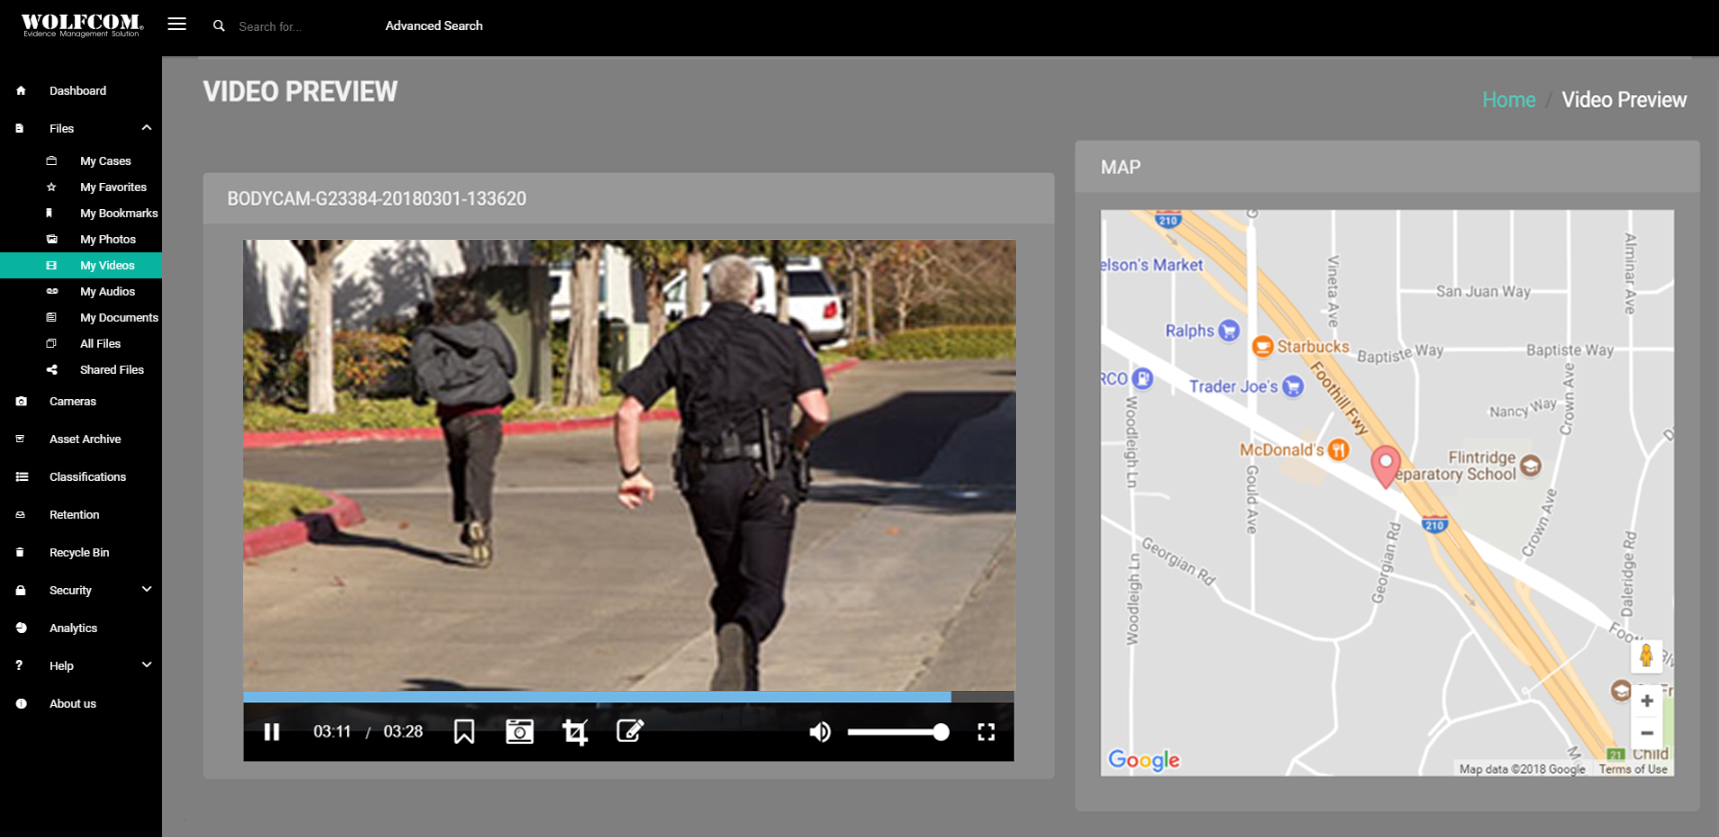 wolfcom cloud evidence management system video playback with GPS geotagging